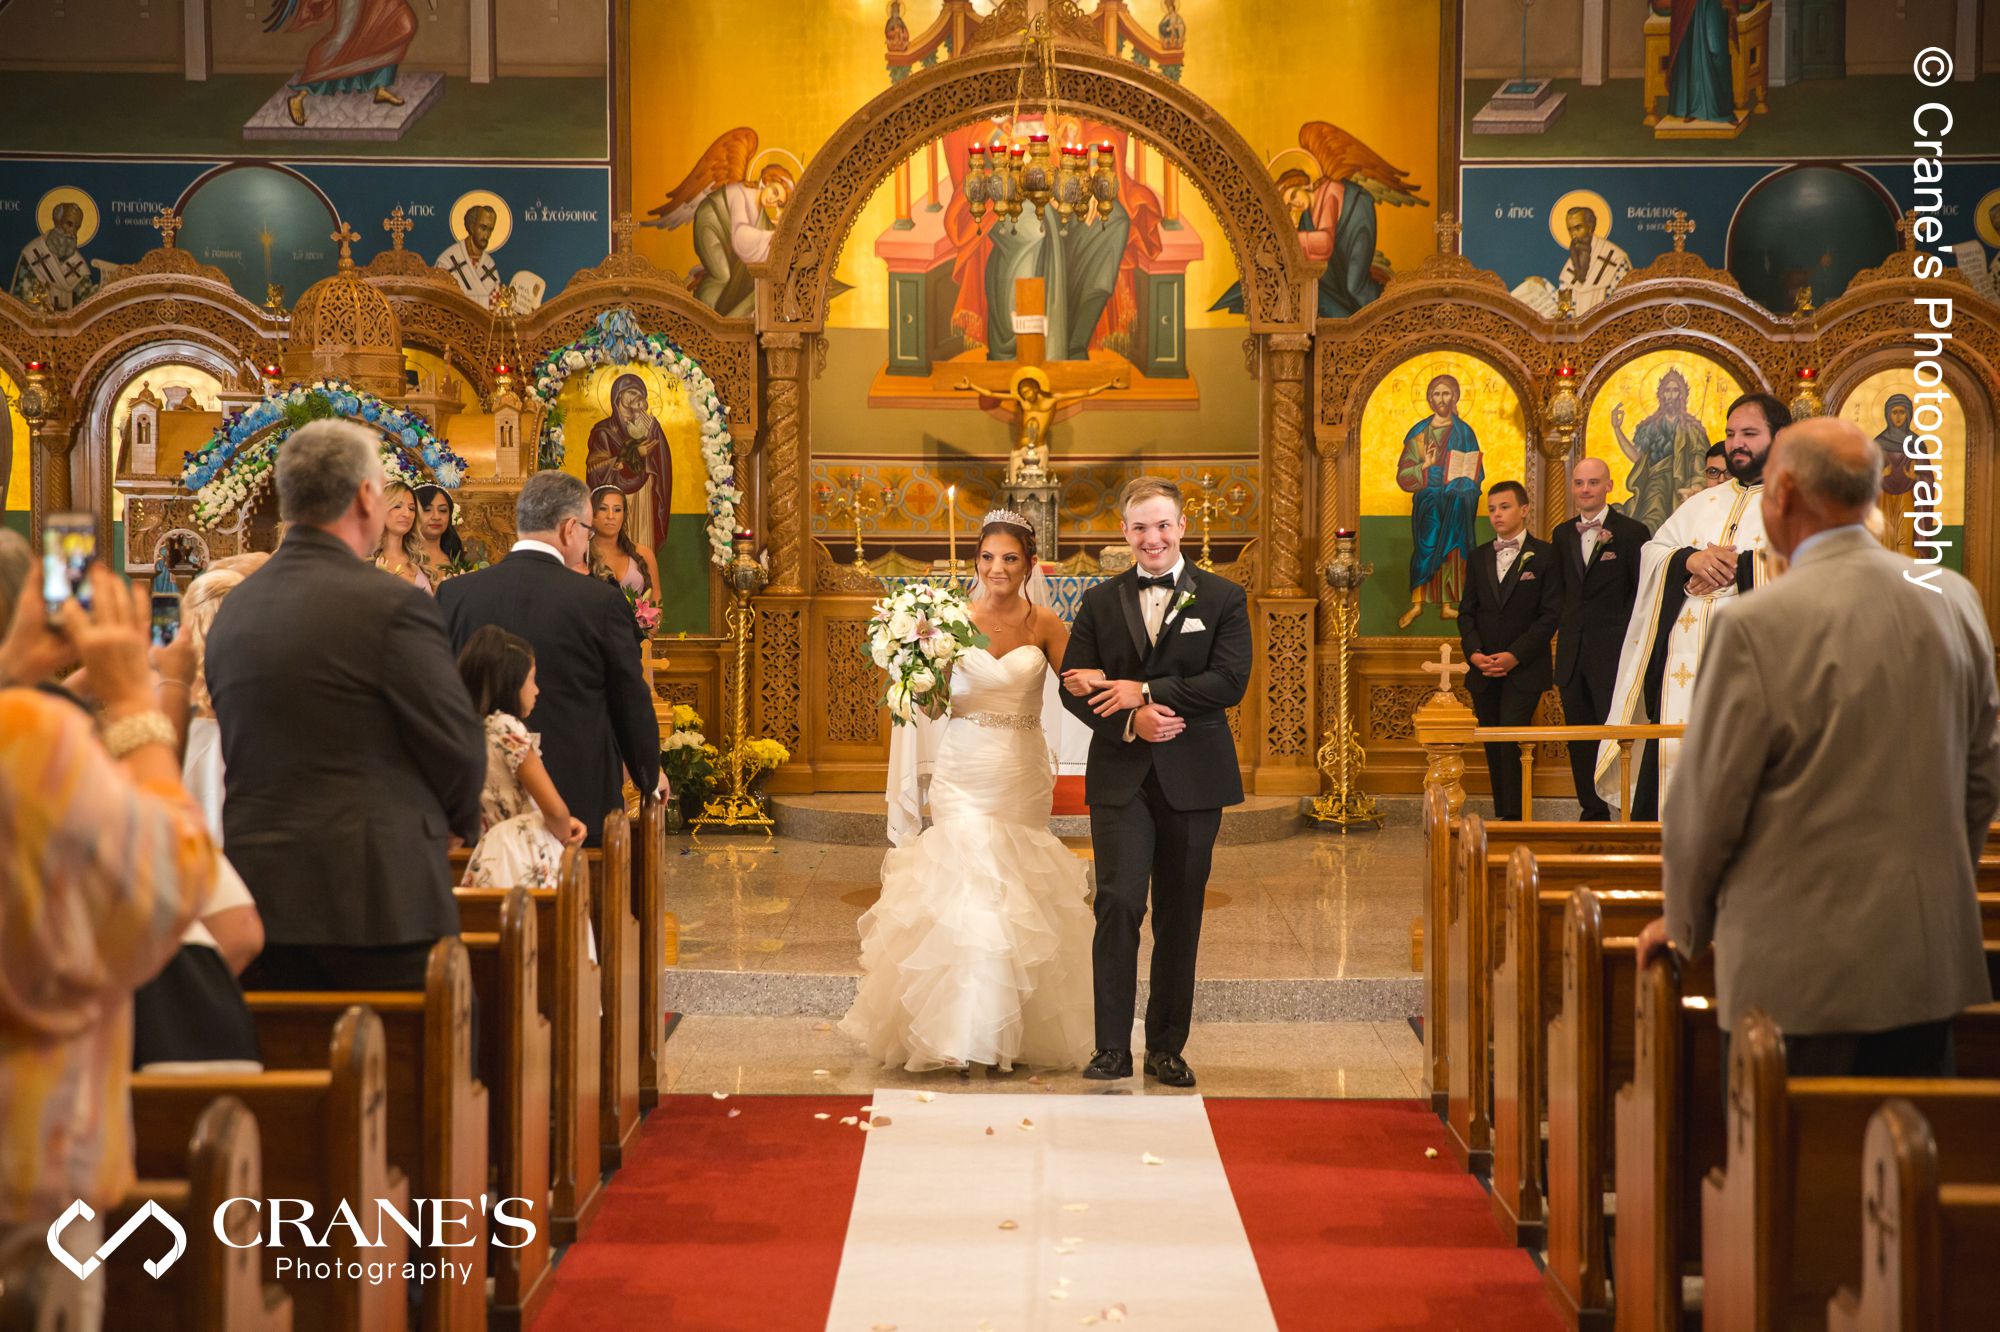 Bride and groom exit an orthodox wedding ceremony at St. Nectarios